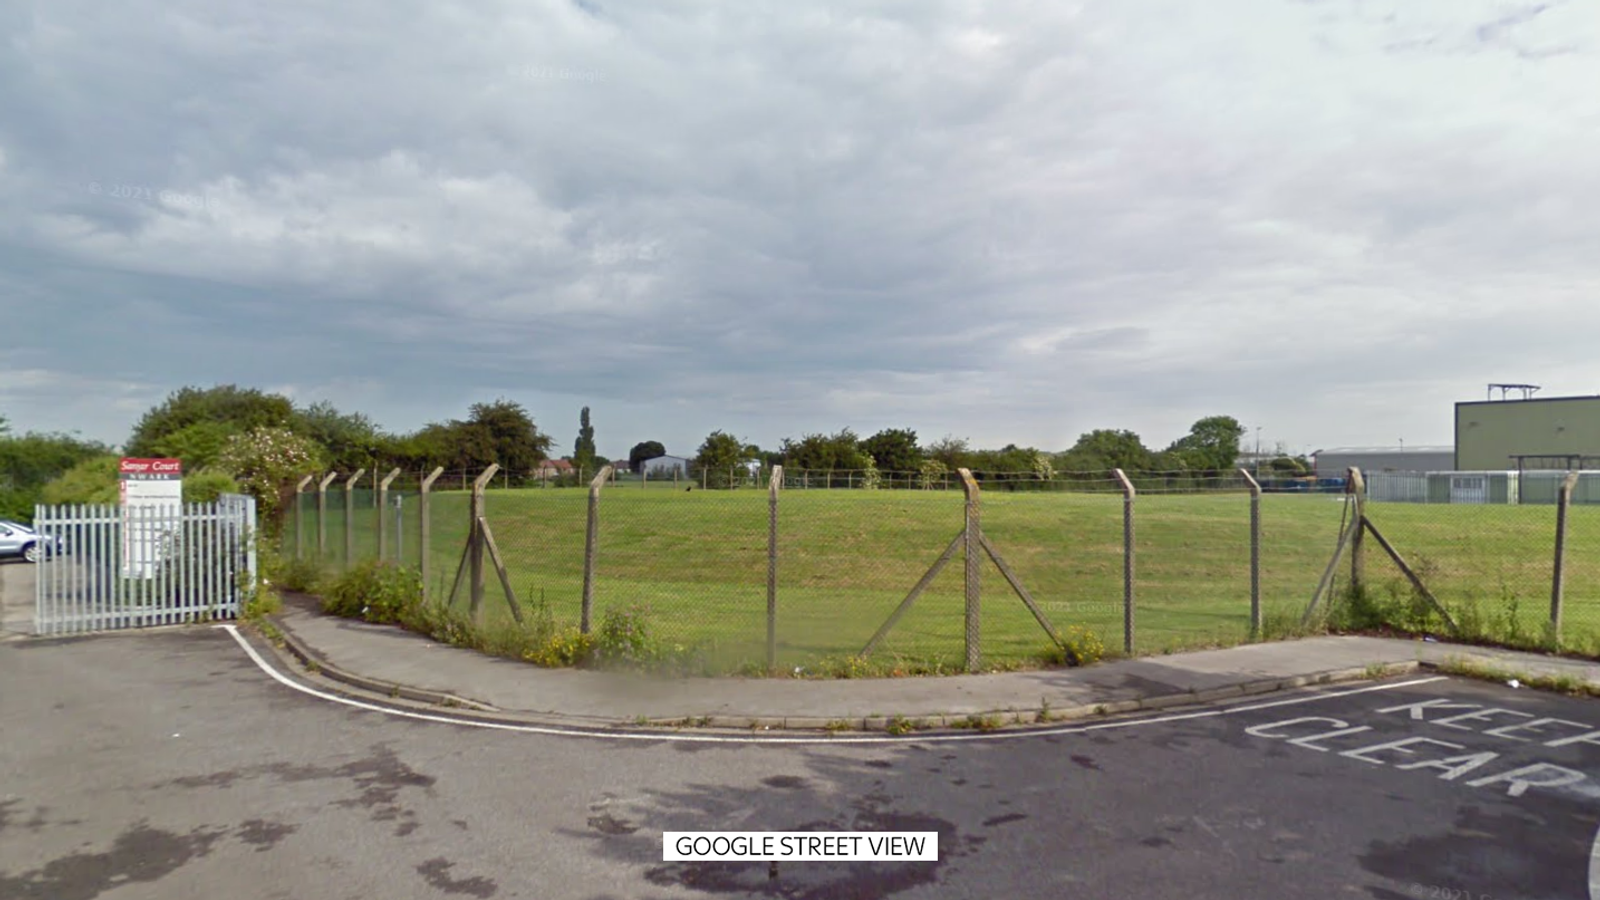 Newark: Eight boys arrested on suspicion of raping teenage girl on playing fields in Nottinghamshire